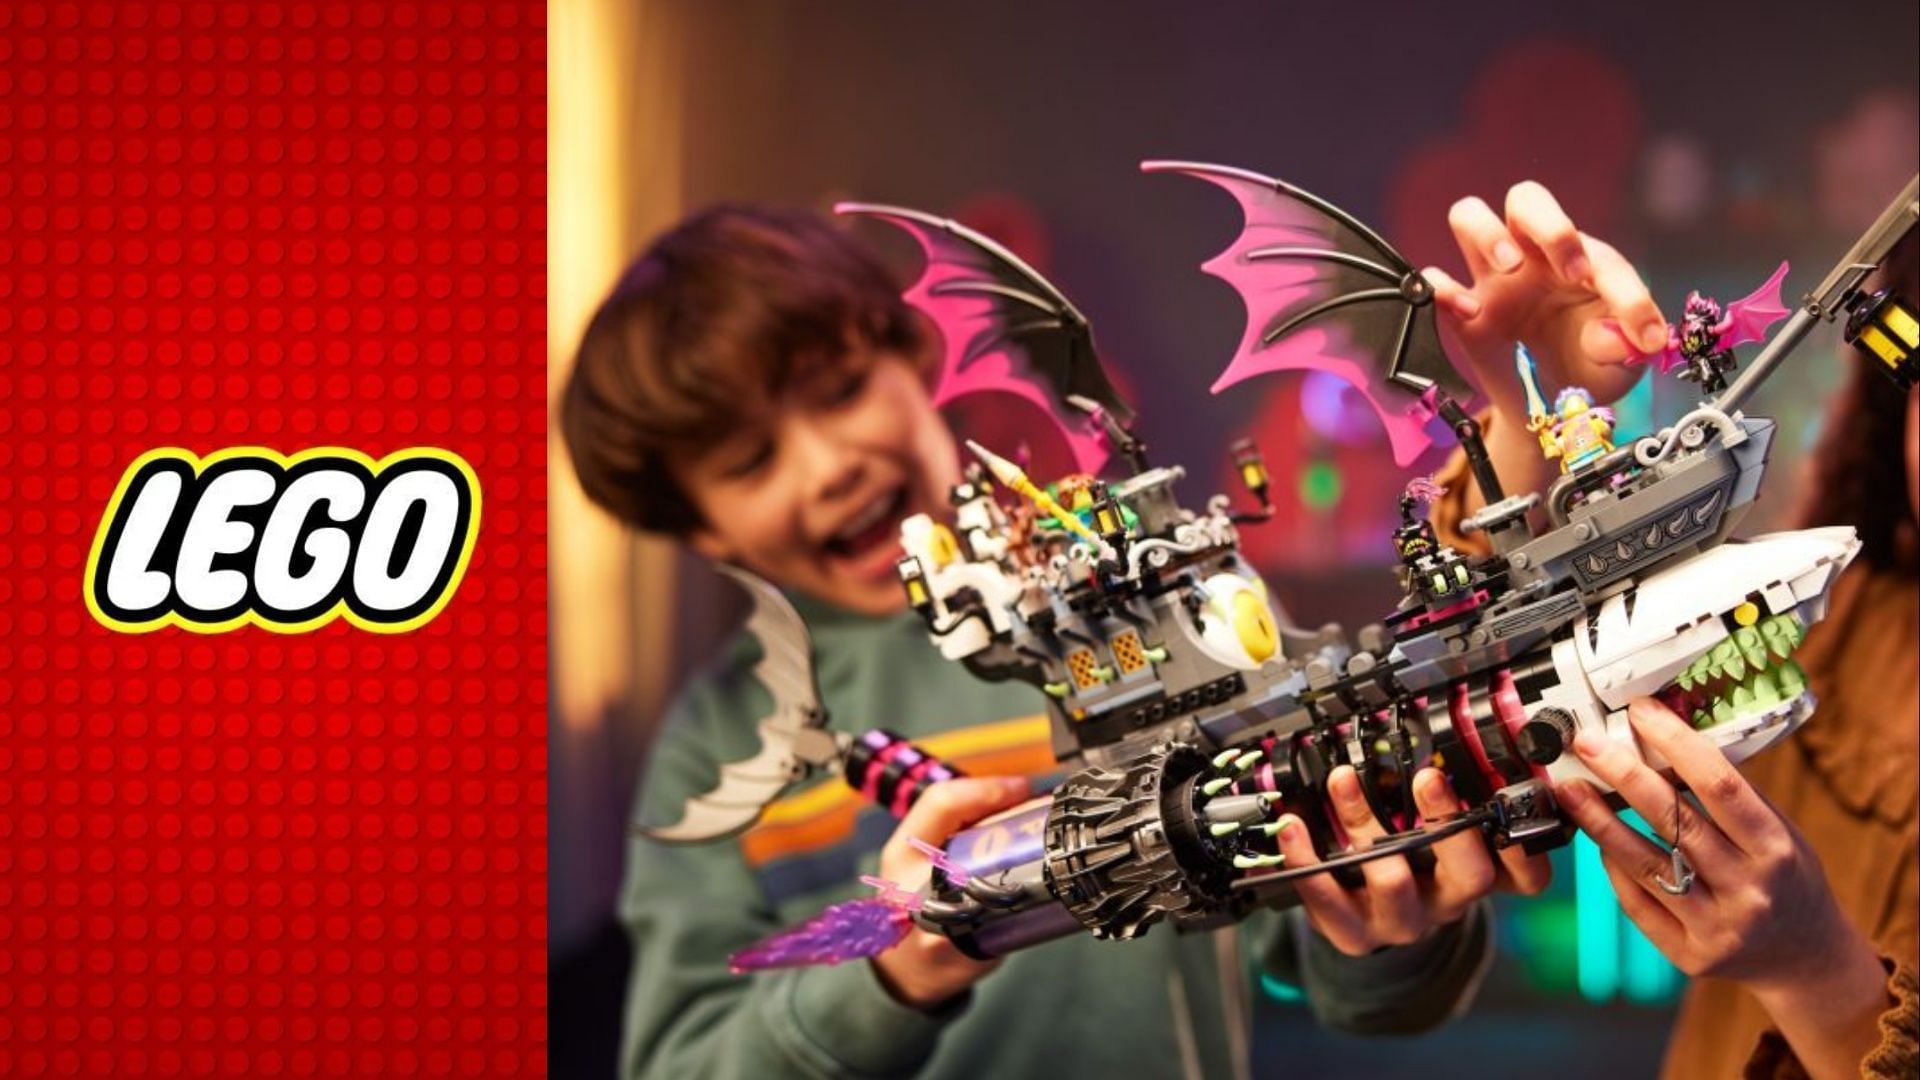 Lego introduces the DreamZzz animated series and new Lego Dreamzzz sets (Image via LEGO)